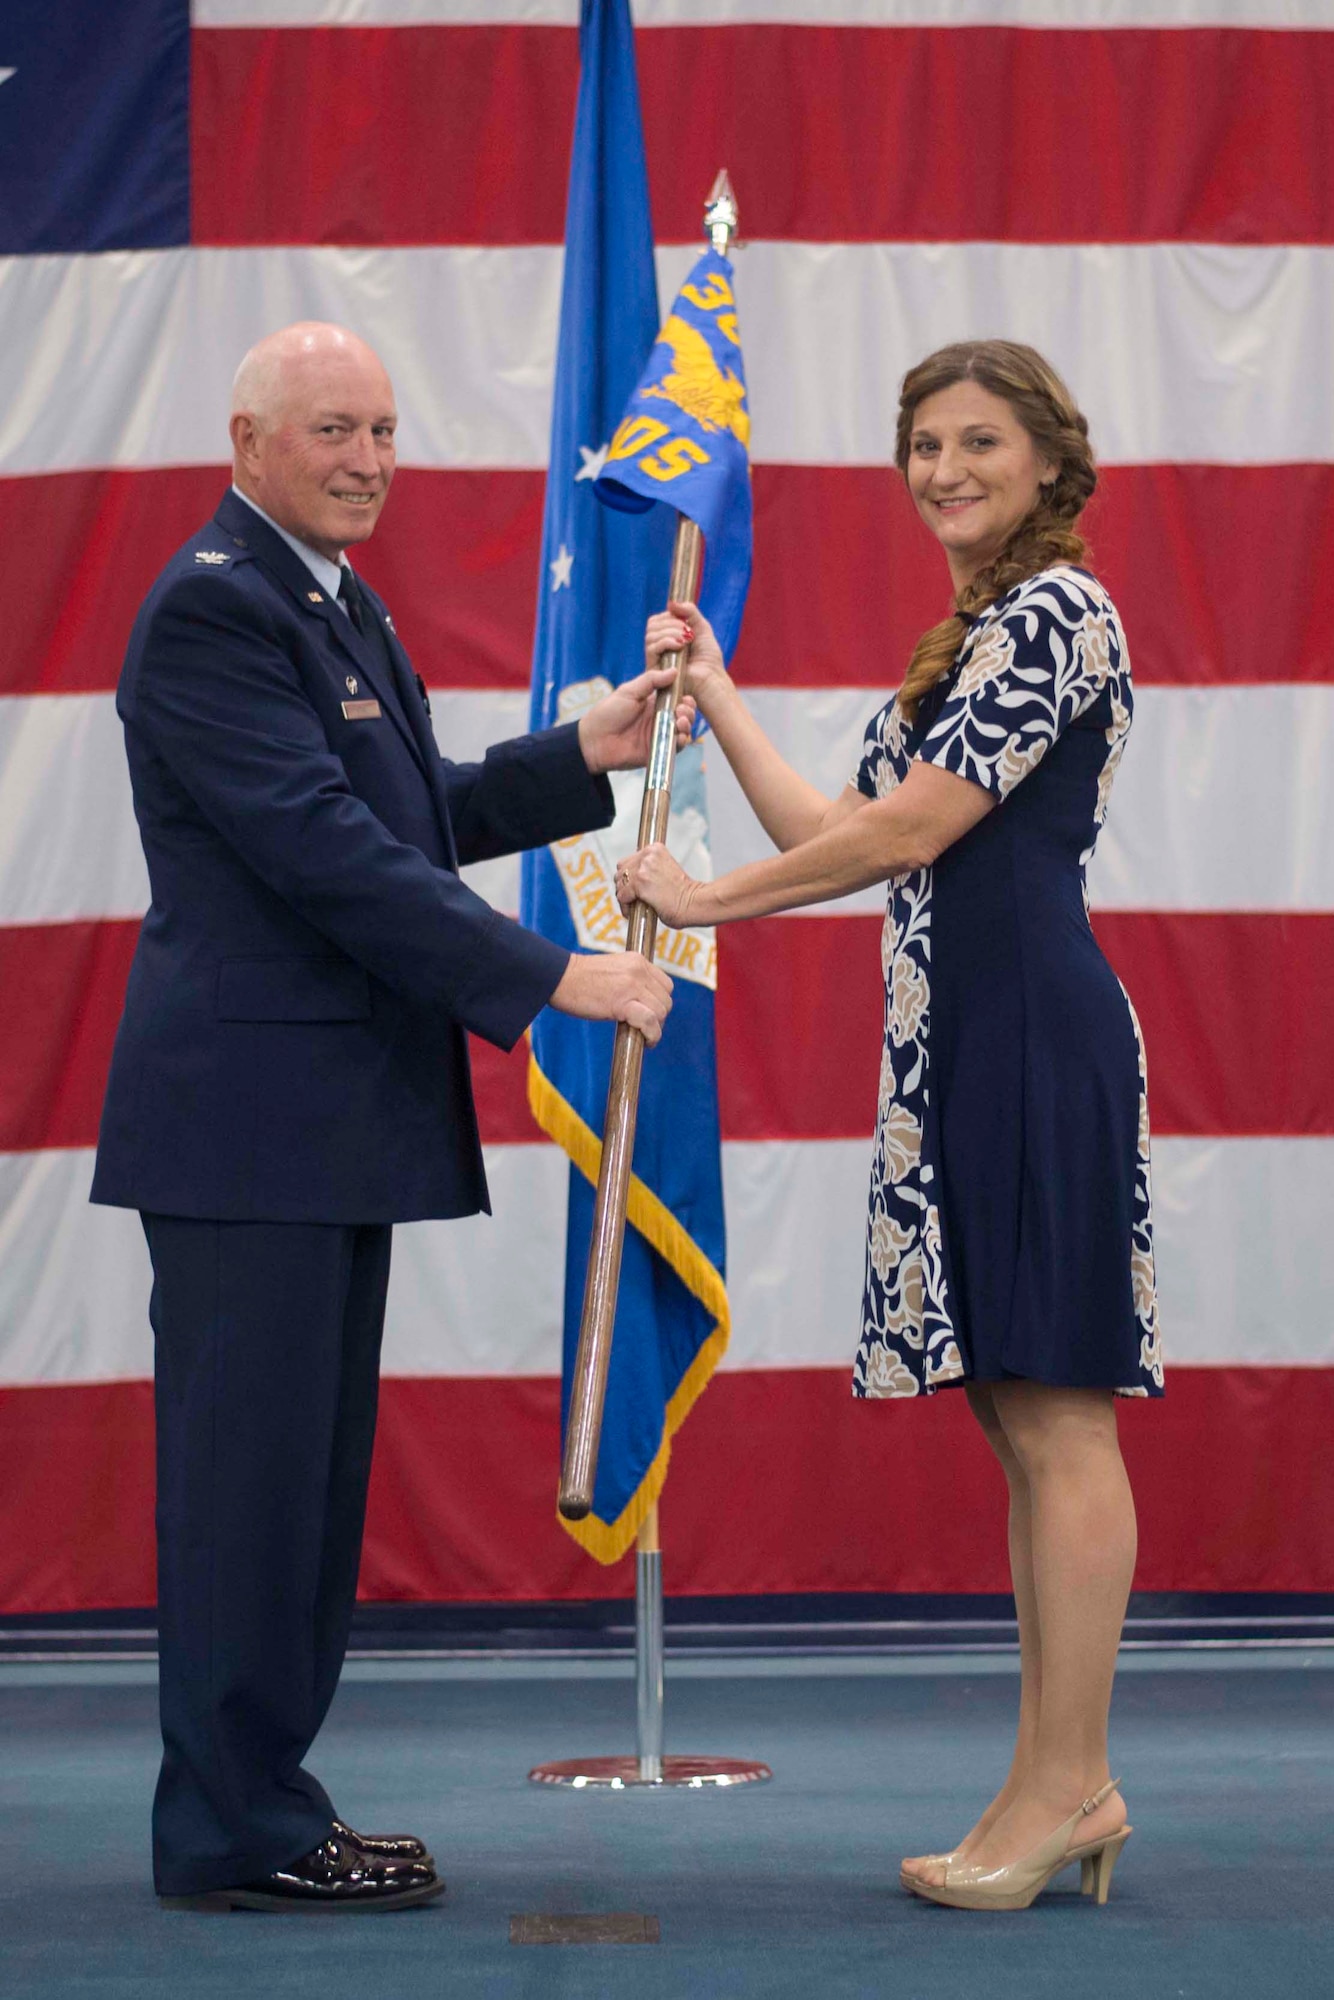 Dr. Tess VanHoy, 307th Medical Squadron honorary commander, accepts the unit guidon from Col. Louis Fehl, 307th MDS commander, during an induction ceremony at Barksdale Air Force Base, Louisiana, Dec. 1, 2018.  VanHoy, serves as a medical doctor in the Shreveport and is the first honorary commander of the 307th MDS. (U.S. Air Force photo by Master Sgt. Ted Daigle)